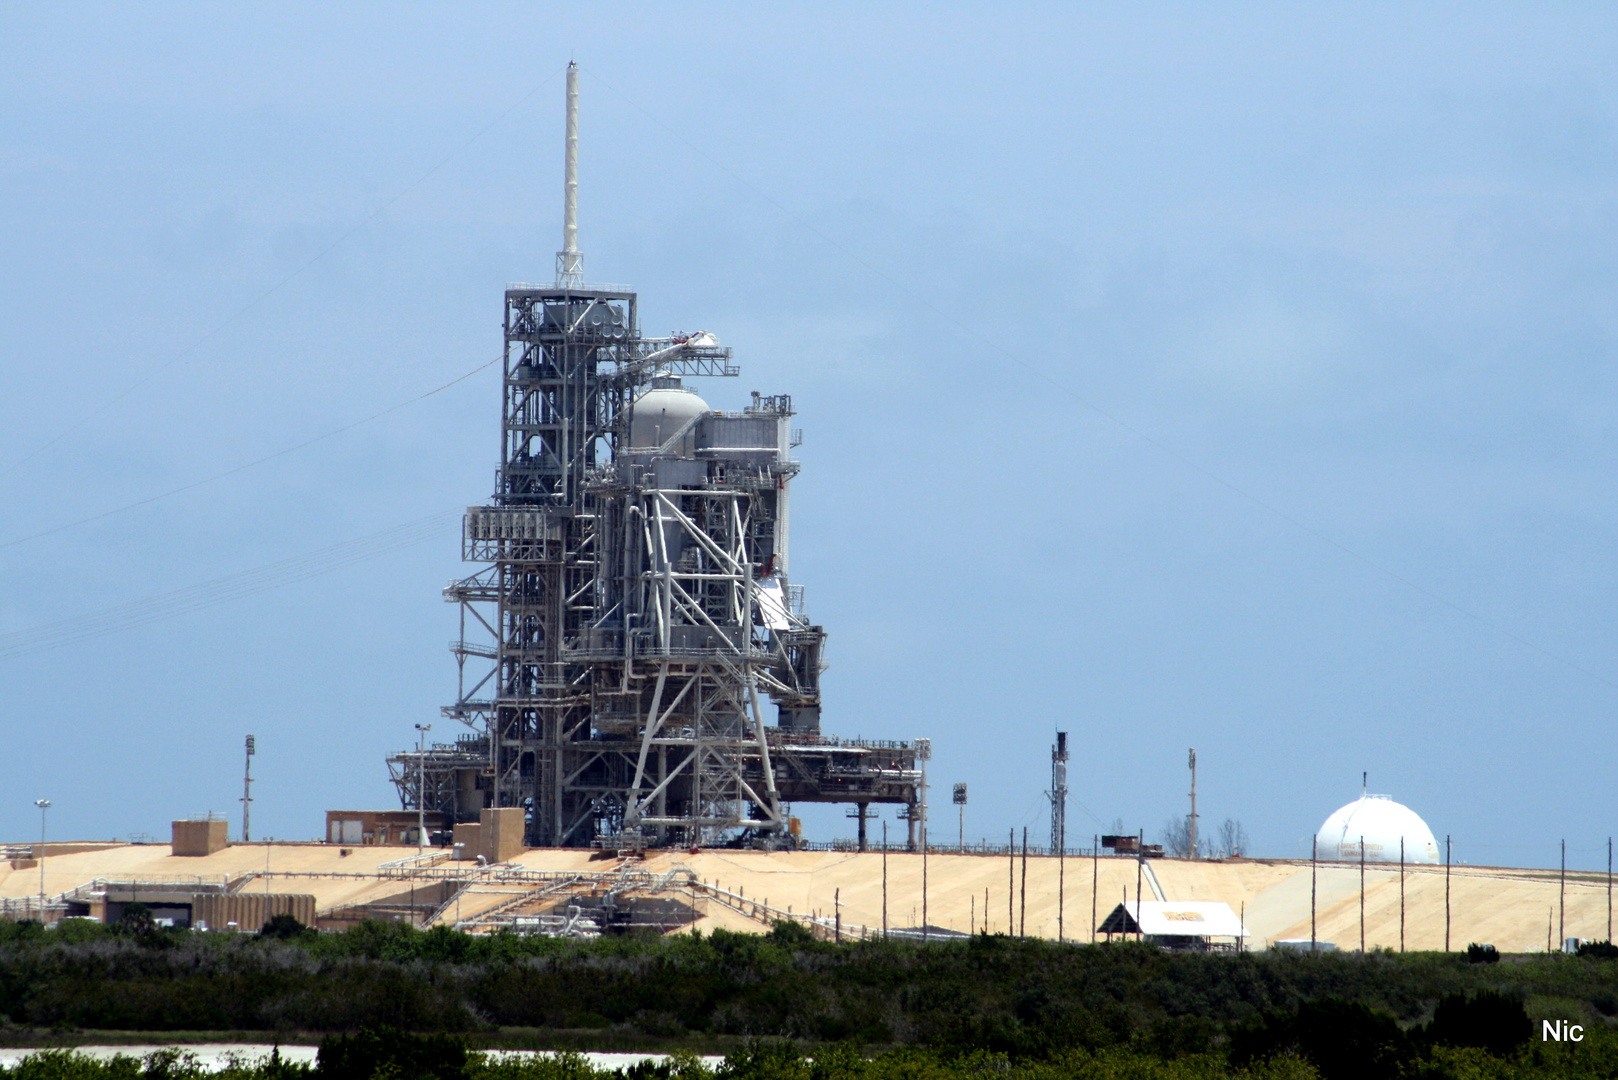 Cape Canaveral Air Force Station 2012